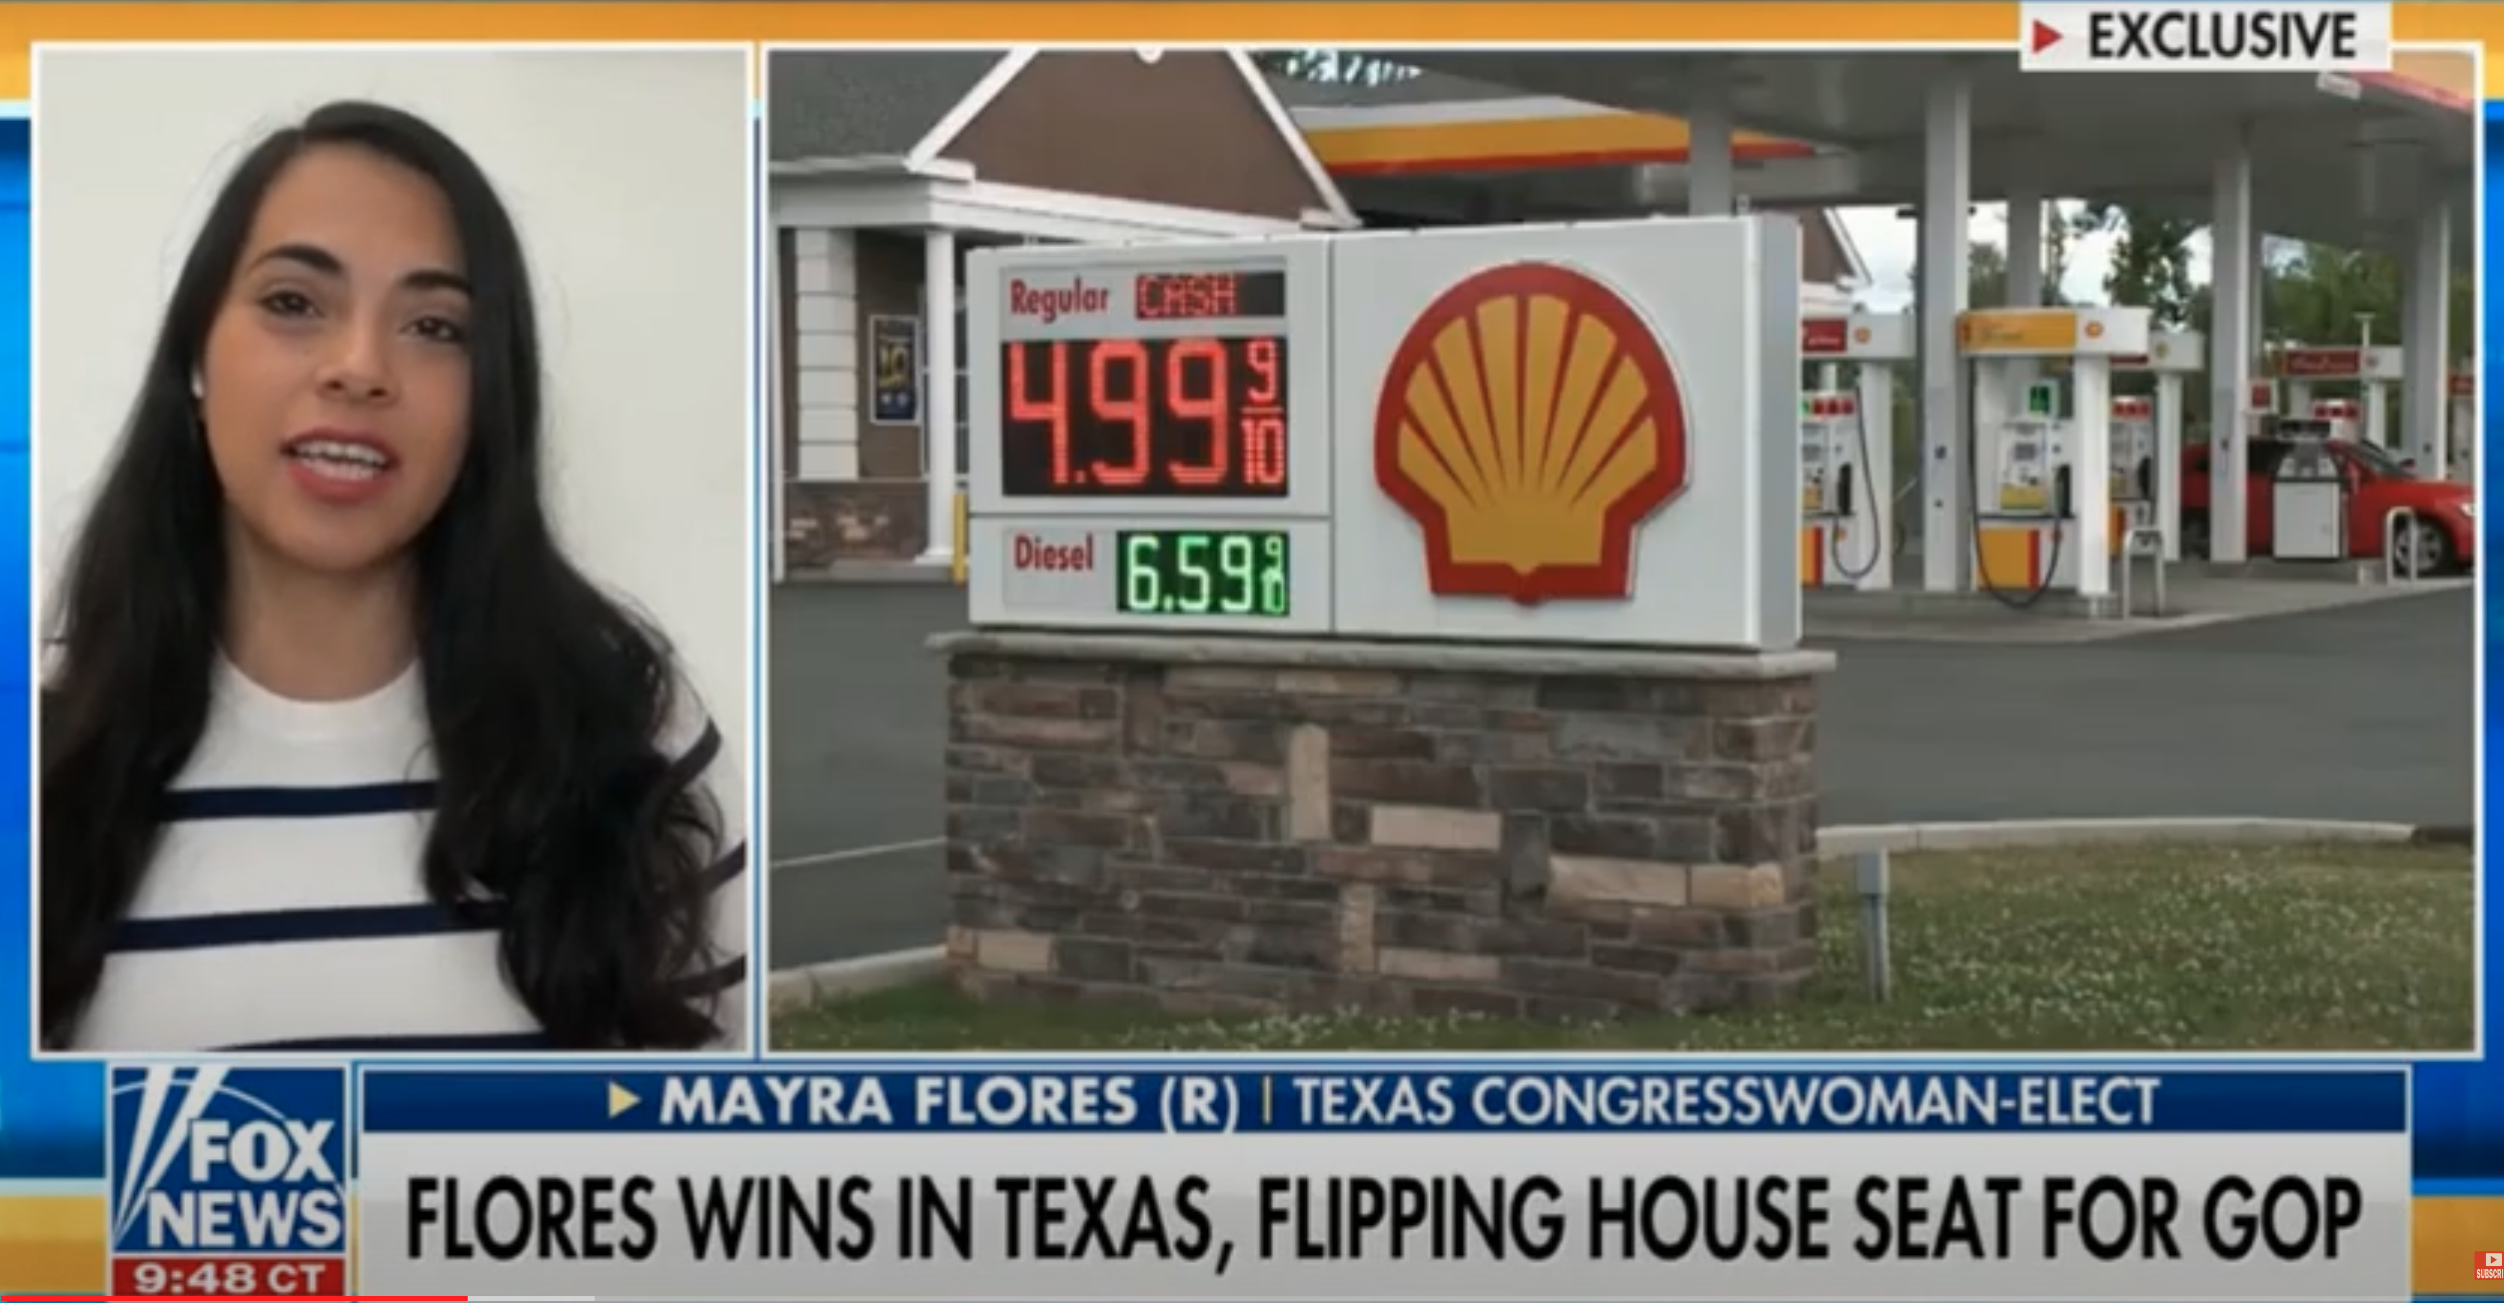 Mayra Flores discusses her victory on Fox News. Screenshot: Fox News